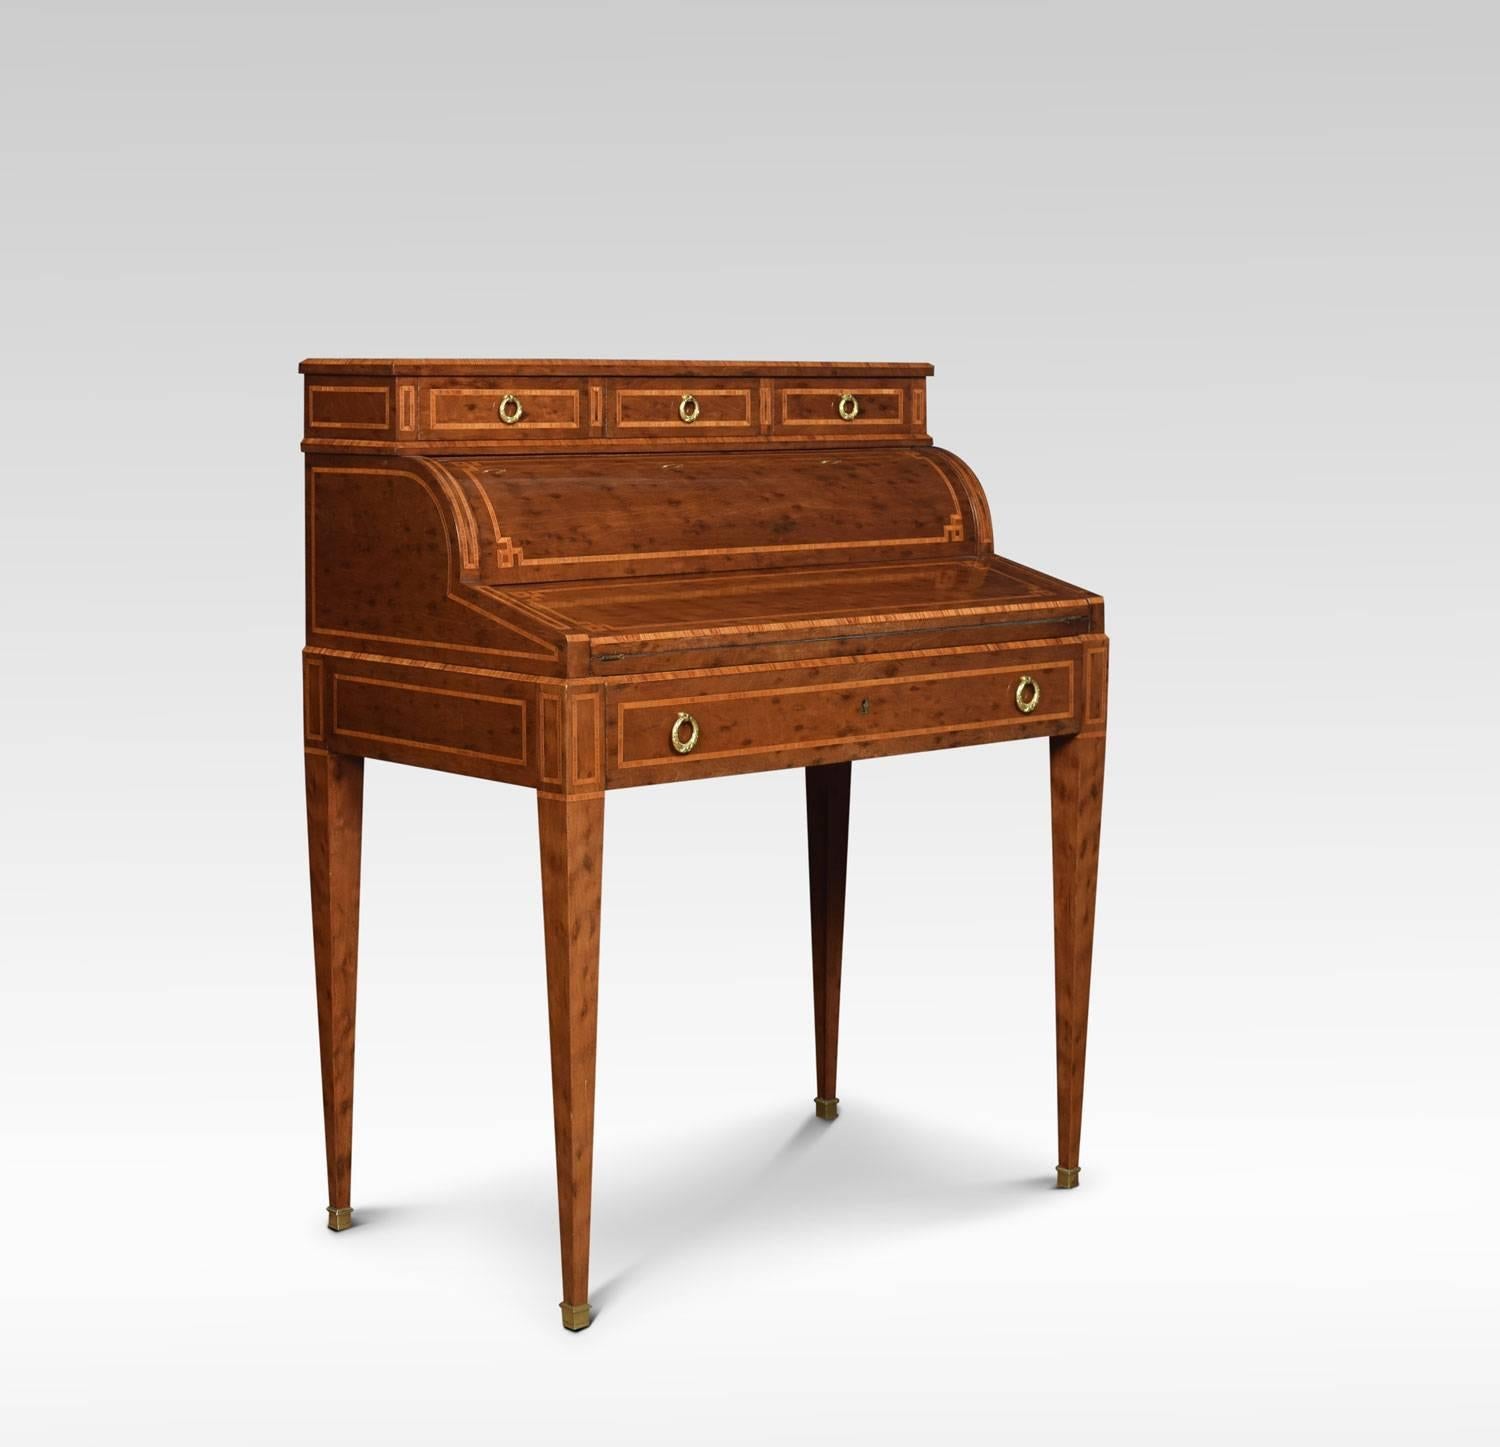 Late 19th century plum pudding mahogany cylinder top writing desk the raised top fitted with three short drawers with brass tolled handles. To the mechanical action cylinder front opening to reveal fitted interior and gilt tooled black leather inset